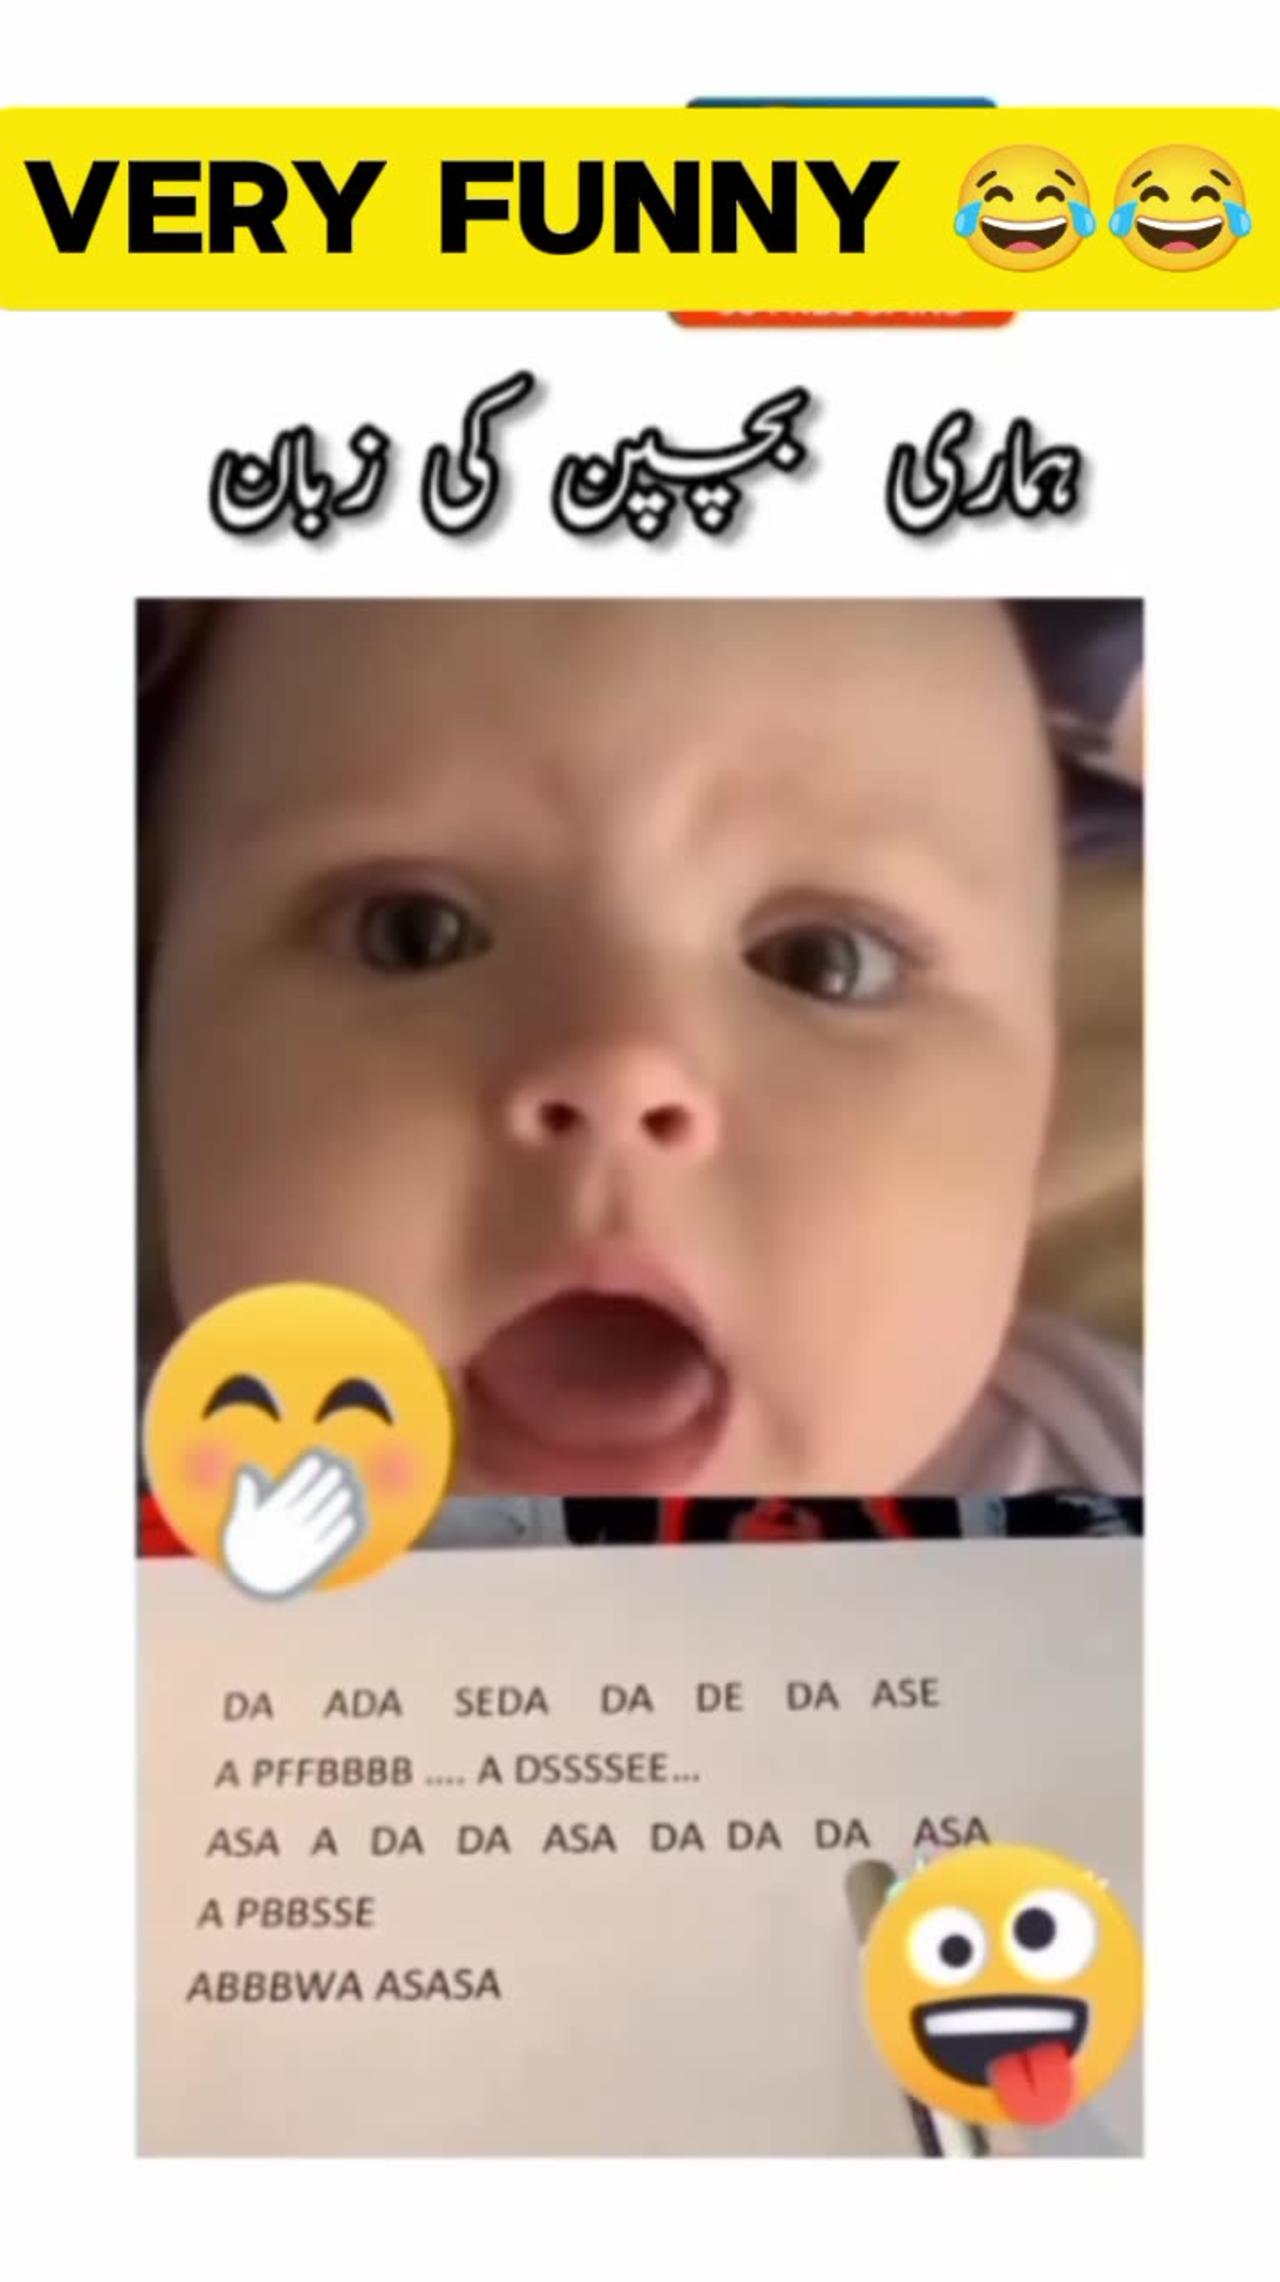 Funny video of cute baby